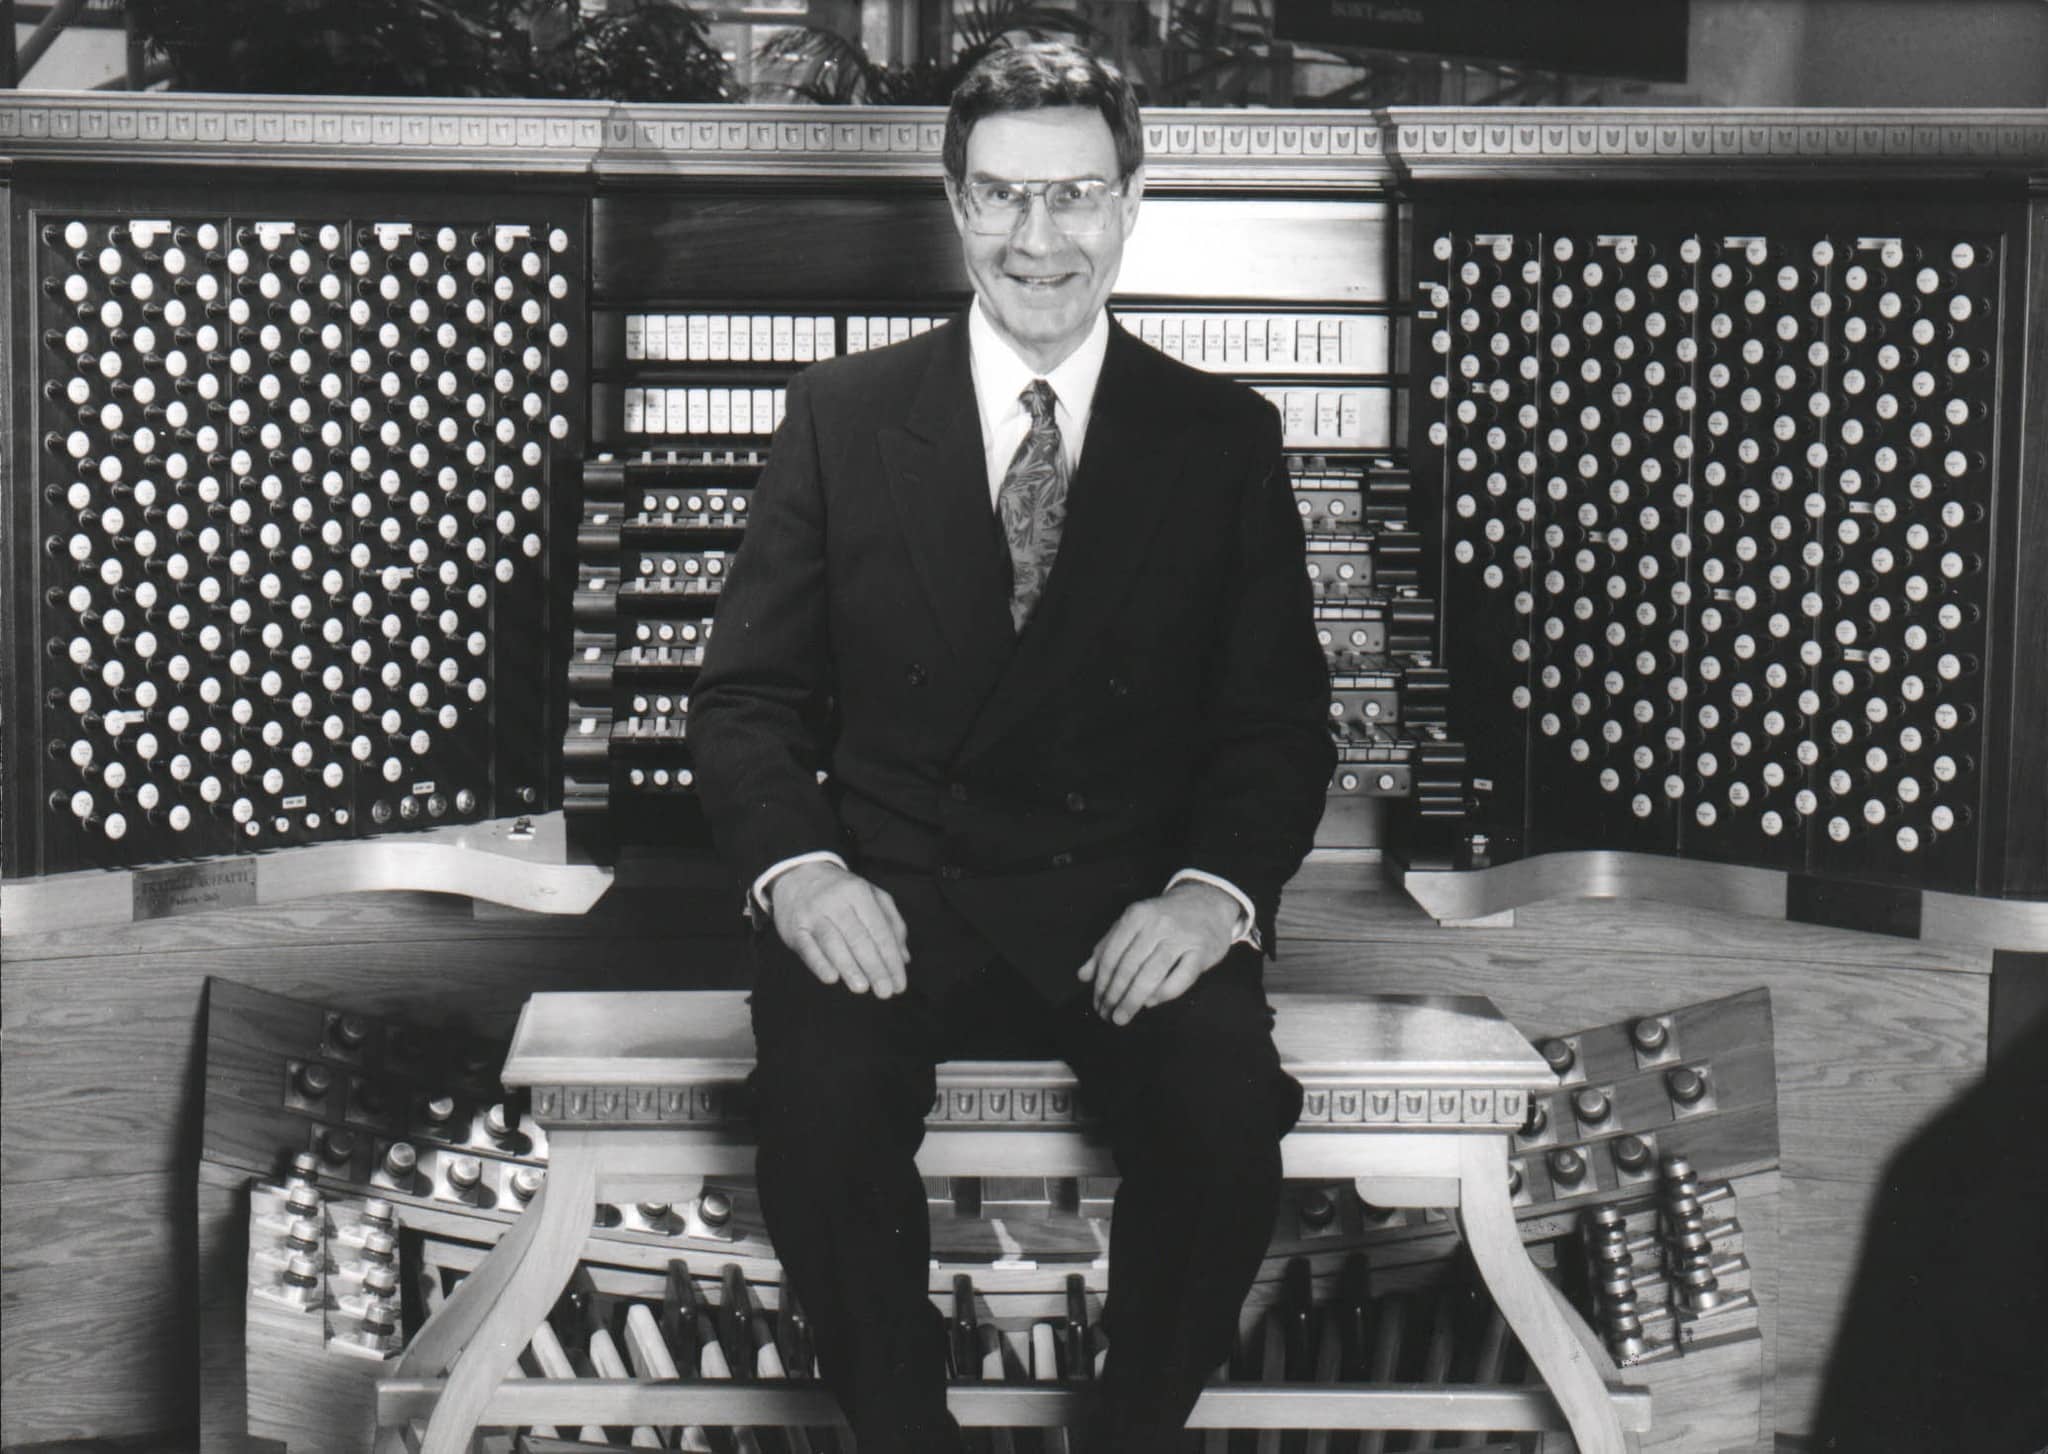 Organists mourns an American legend